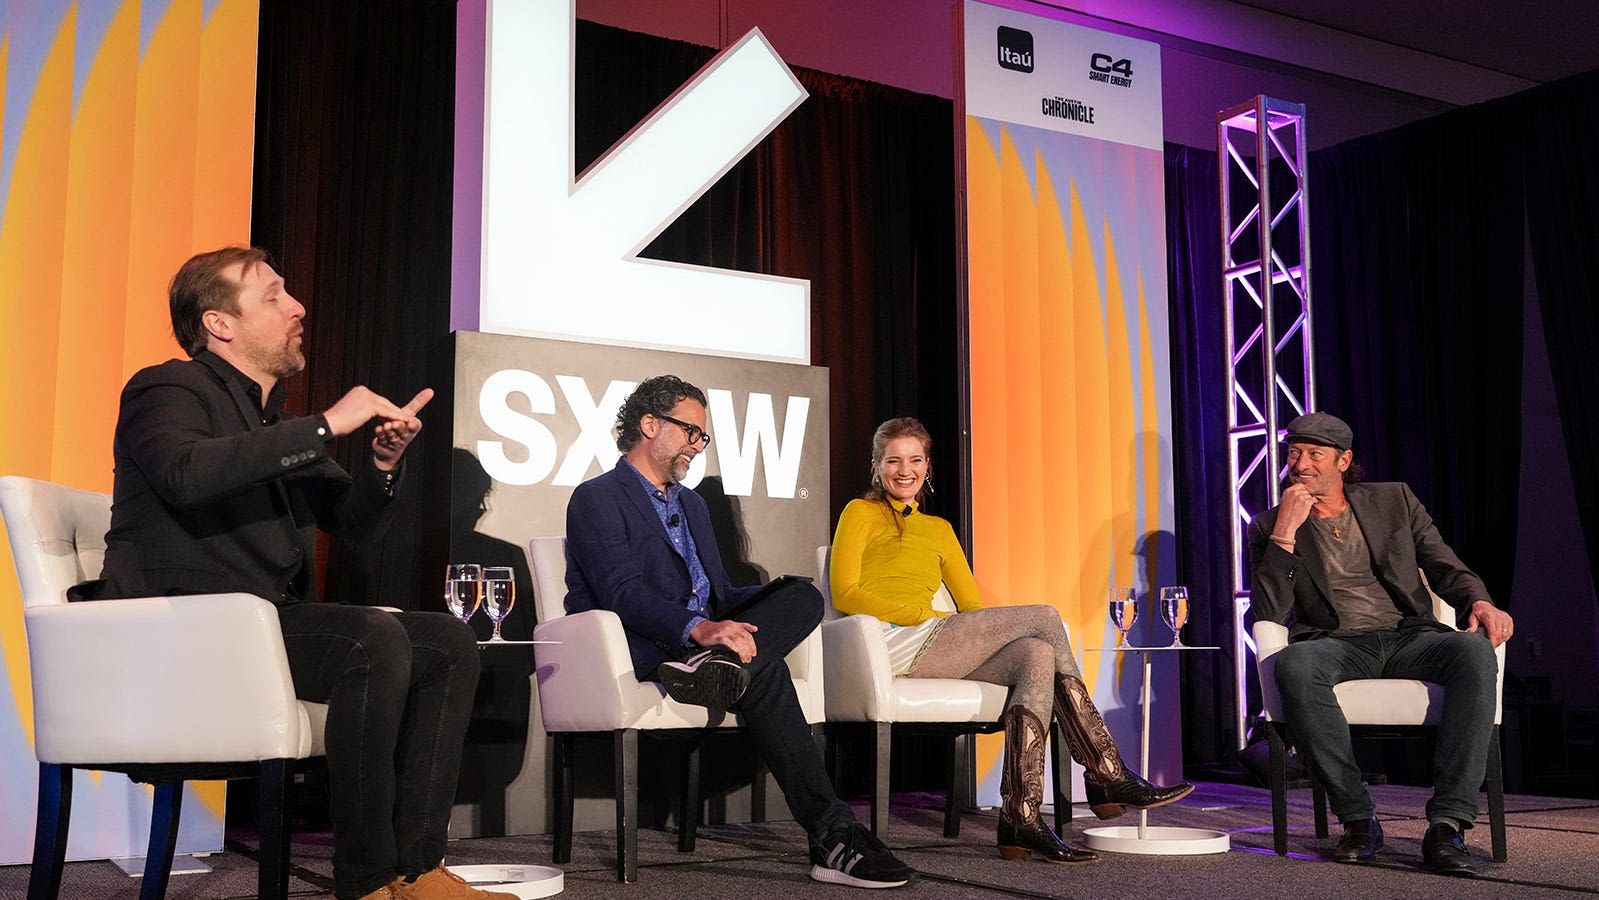 SXSW is expanding to London in 2025. Here's what you need to know